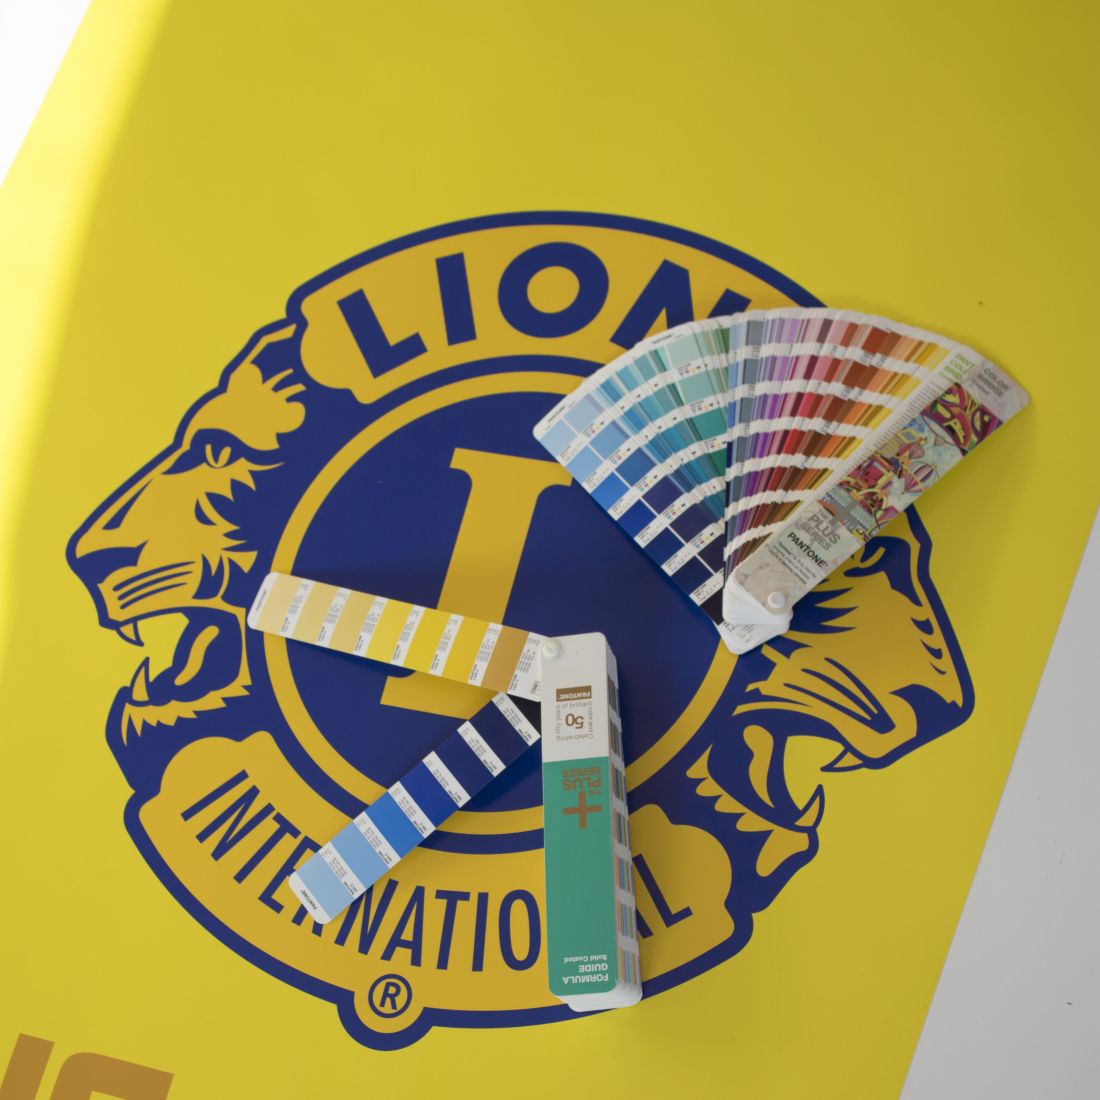 logo in Pantone 287 C and 7406 C on Roll-Up banner